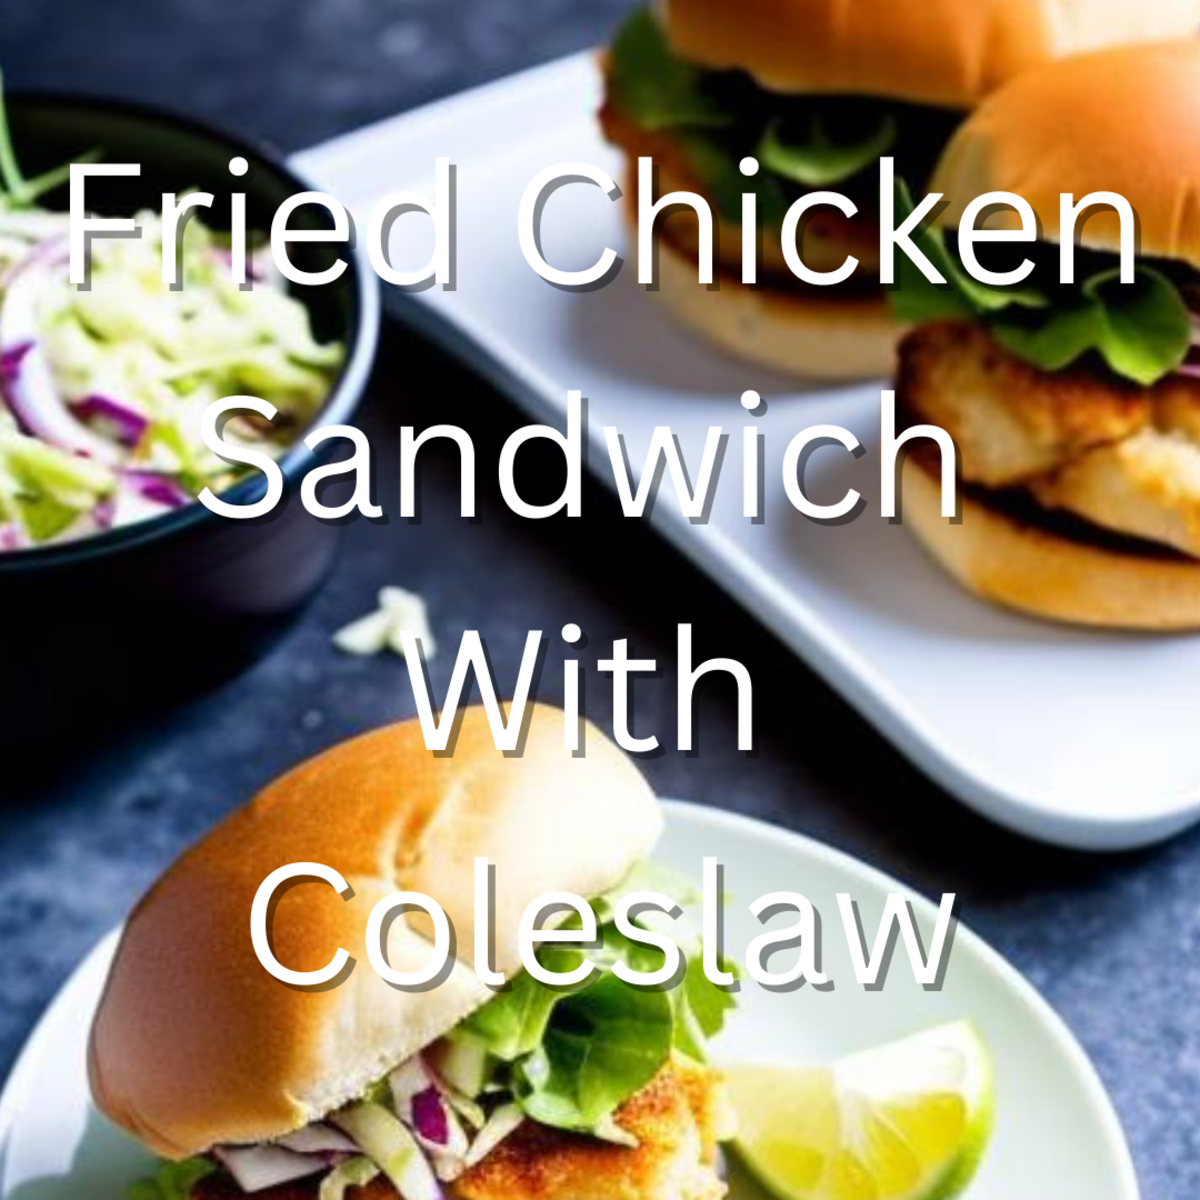 Fried Chicken Sandwich With Coleslaw